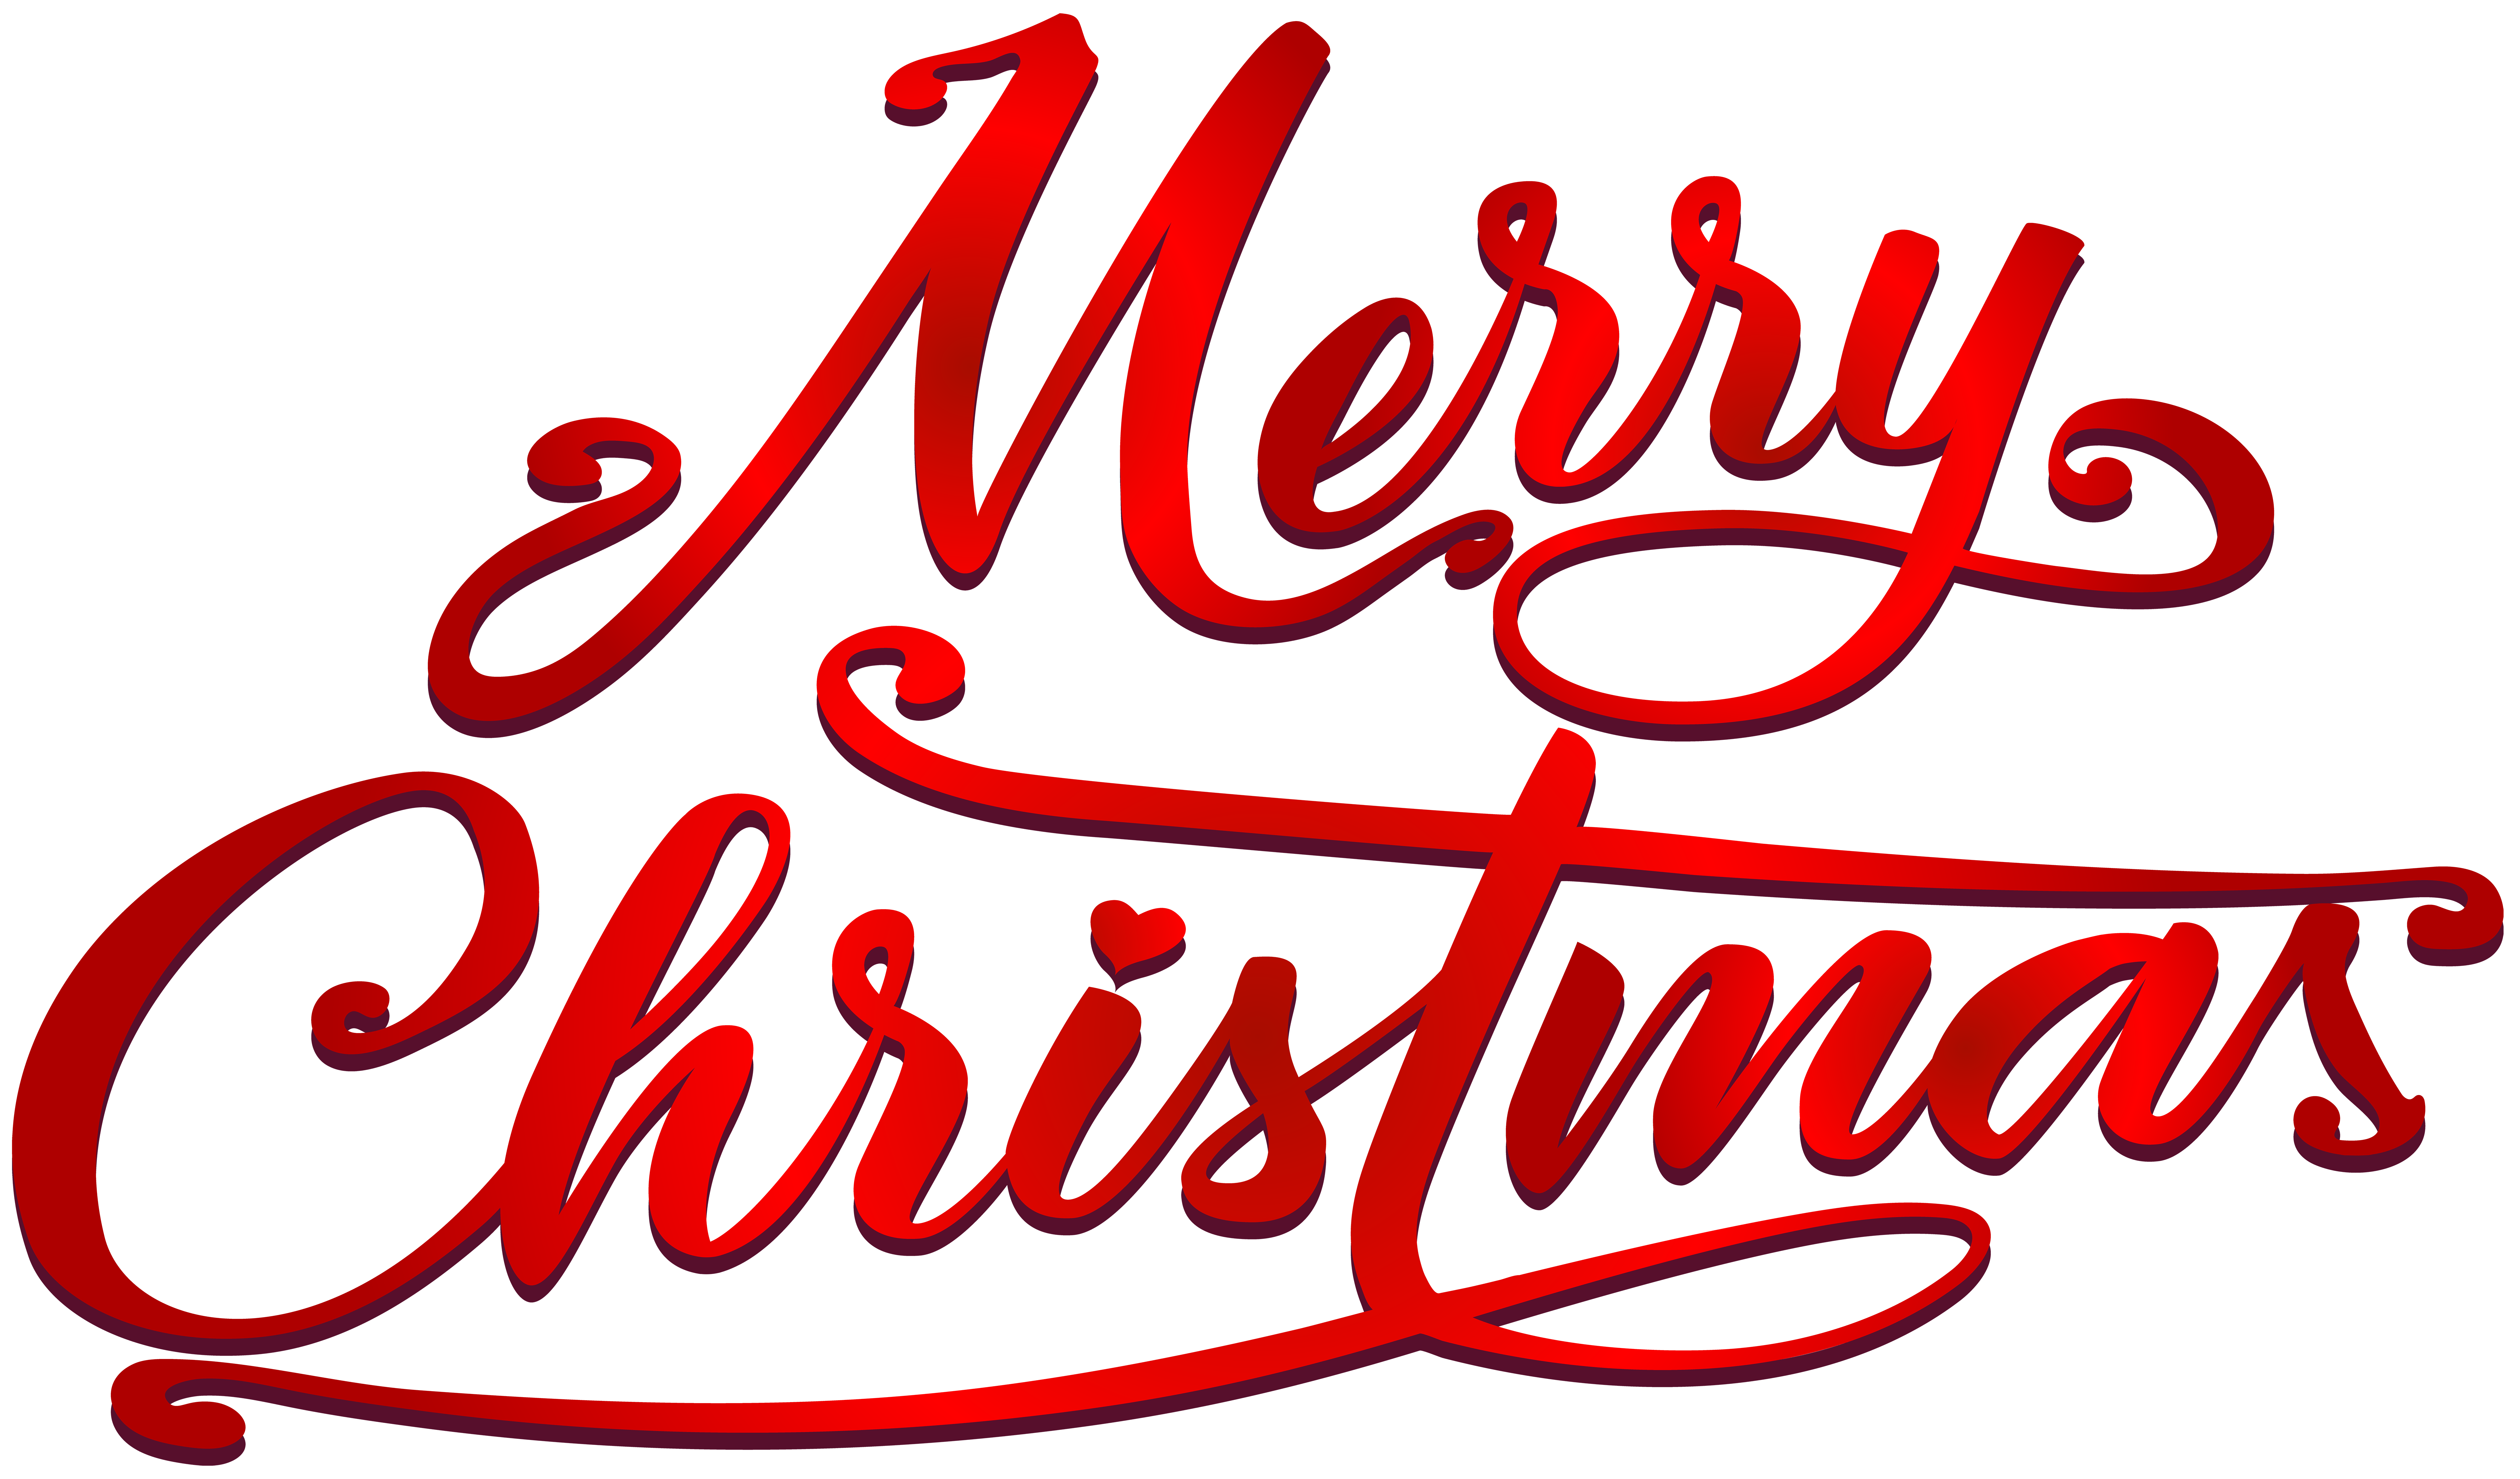 Royal Christmas Message Santa Claus Child Merry Christmas Text Png Clip Art Image Png Download 8000 4696 Free Transparent Royal Christmas Message Png Download Clip Art Library